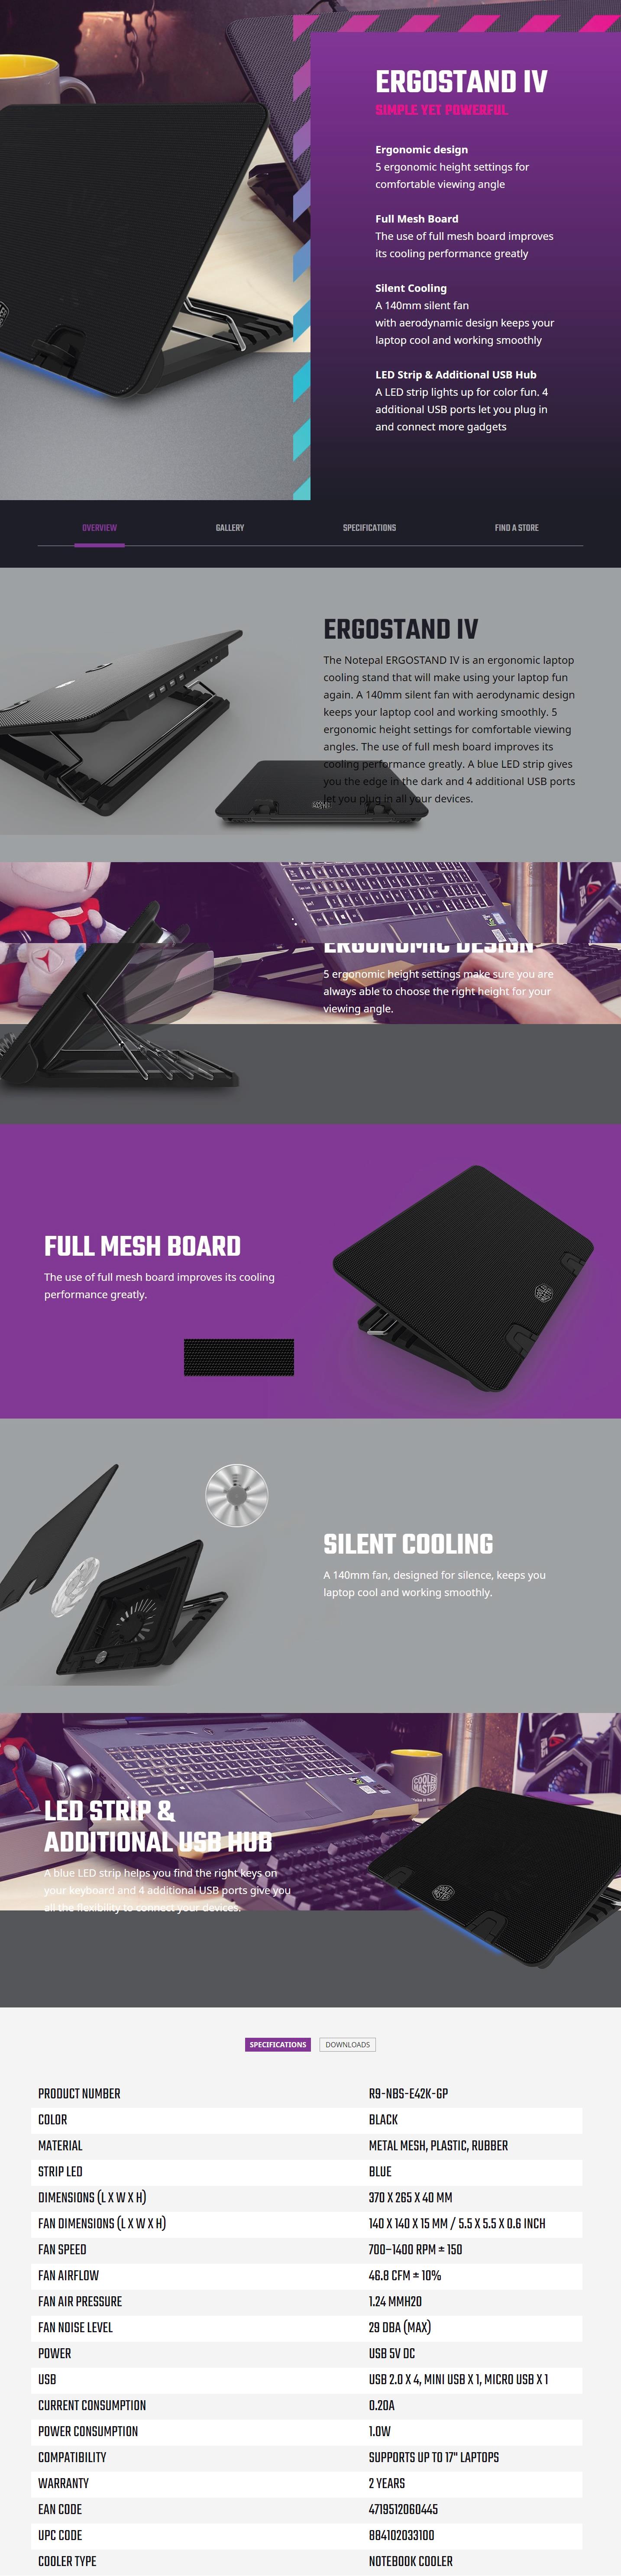 A large marketing image providing additional information about the product Cooler Master Ergostand IV - Additional alt info not provided